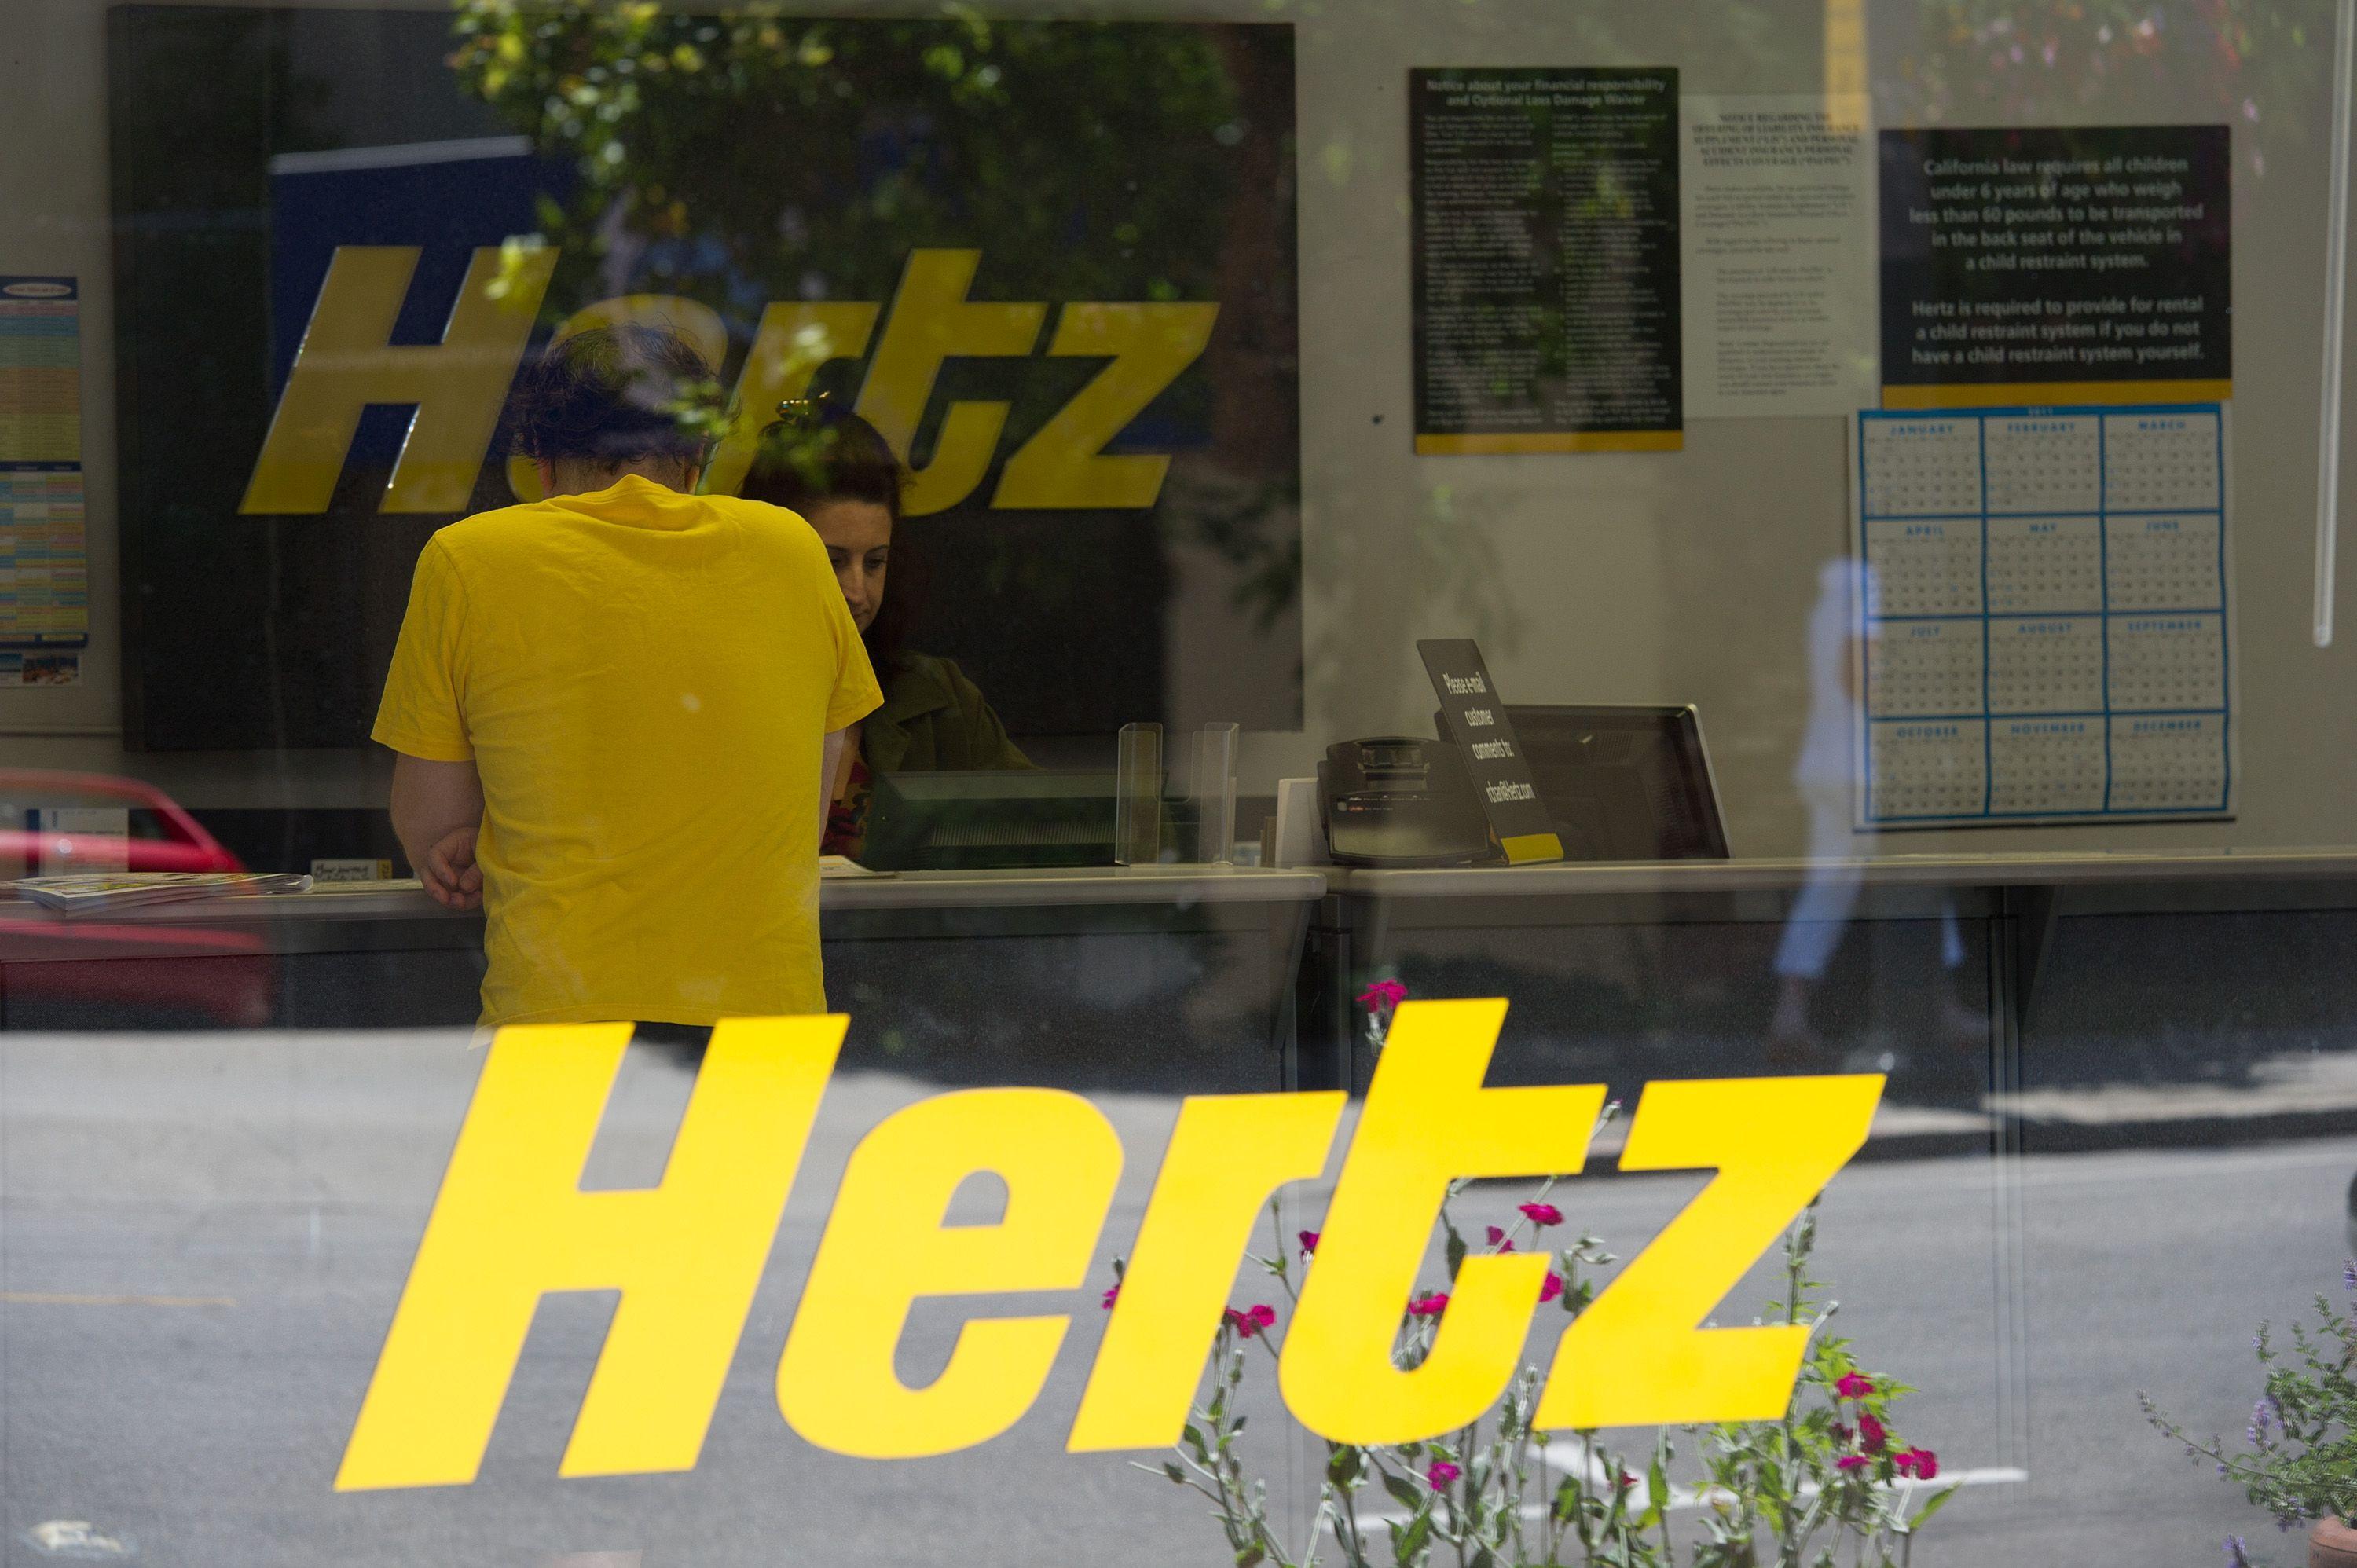 Hertz Corporation Logo - Rental Car Giant Hertz Just Inked a Deal With Uber and Lyft | Fortune